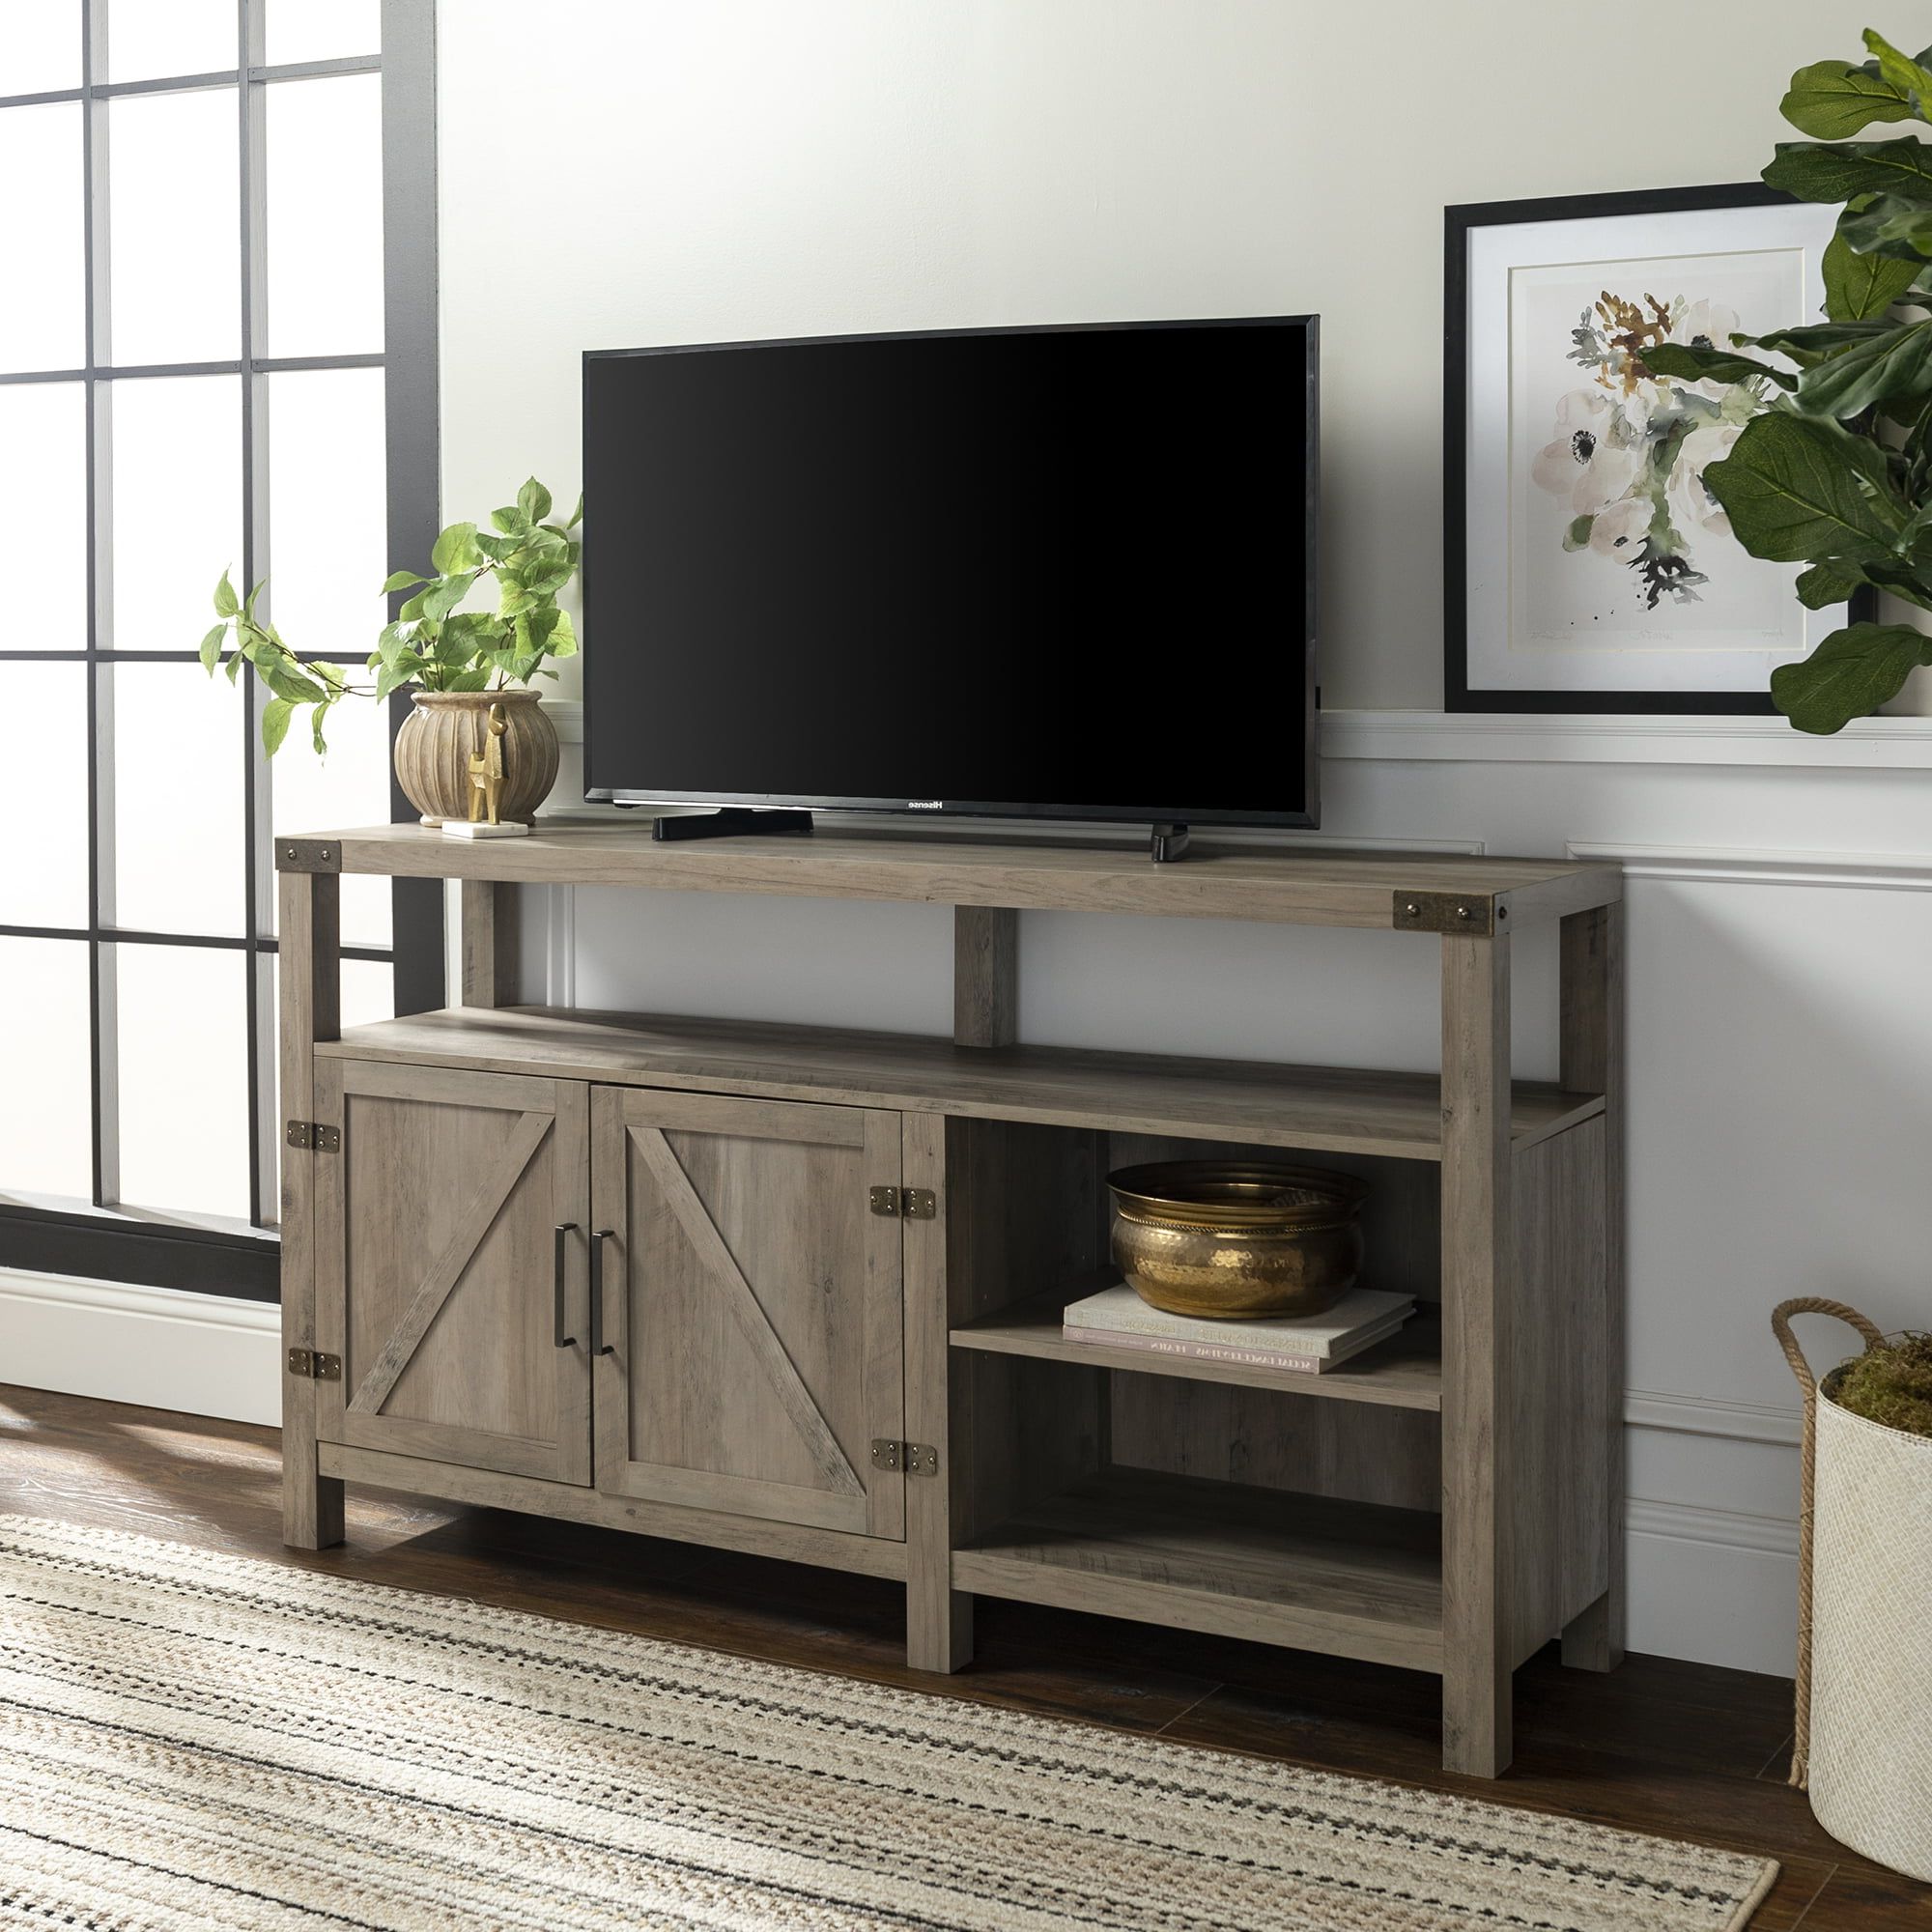 Preferred Modern Farmhouse Rustic Tv Stands With Regard To Manor Park Modern Farmhouse Tall Barn Door Tv Stand For Tv's Up To  (View 11 of 15)